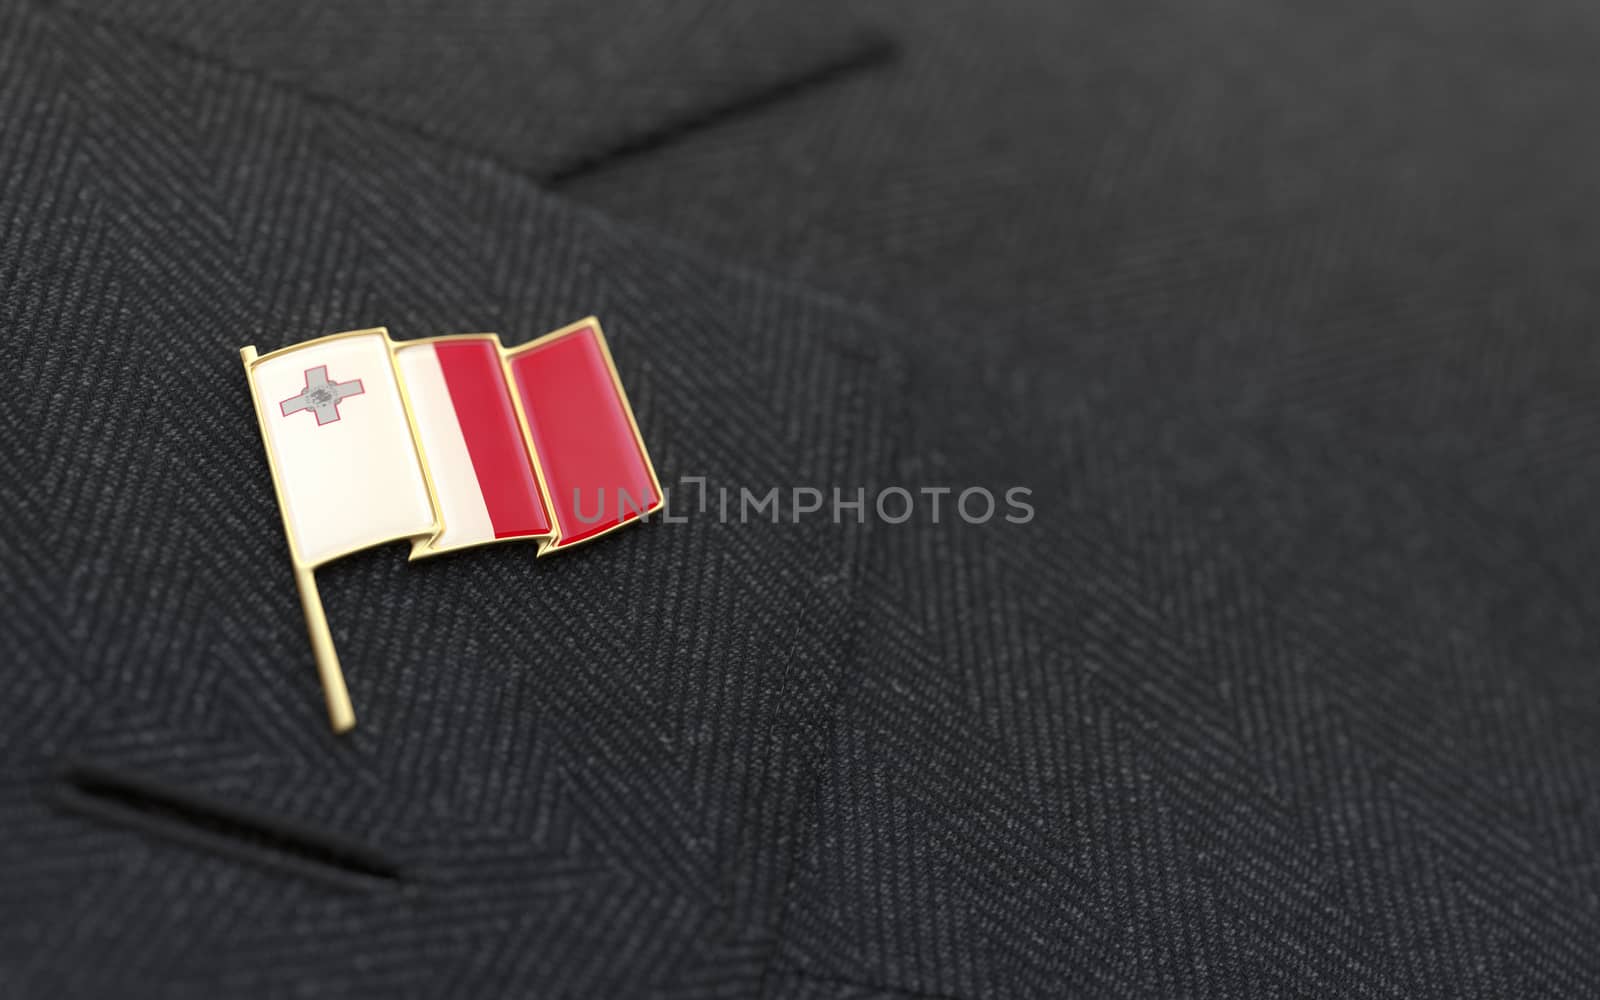 Malta flag lapel pin on the collar of a business suit jacket shows patriotism